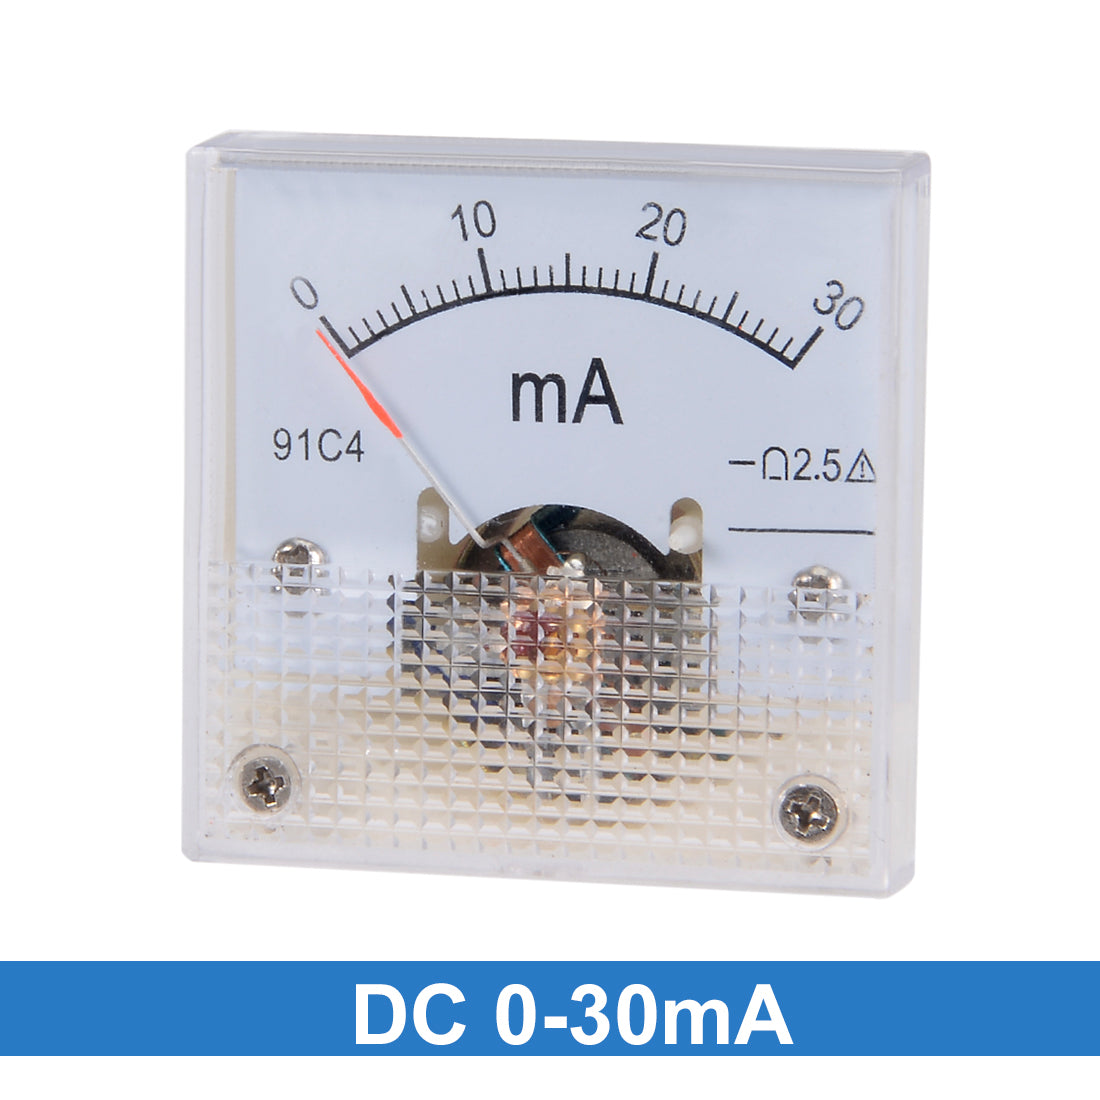 uxcell Uxcell 91C4-A Analog Current Panel Meter DC 30mA Ammeter for Circuit Testing Ampere Tester Gauge 1 PCS